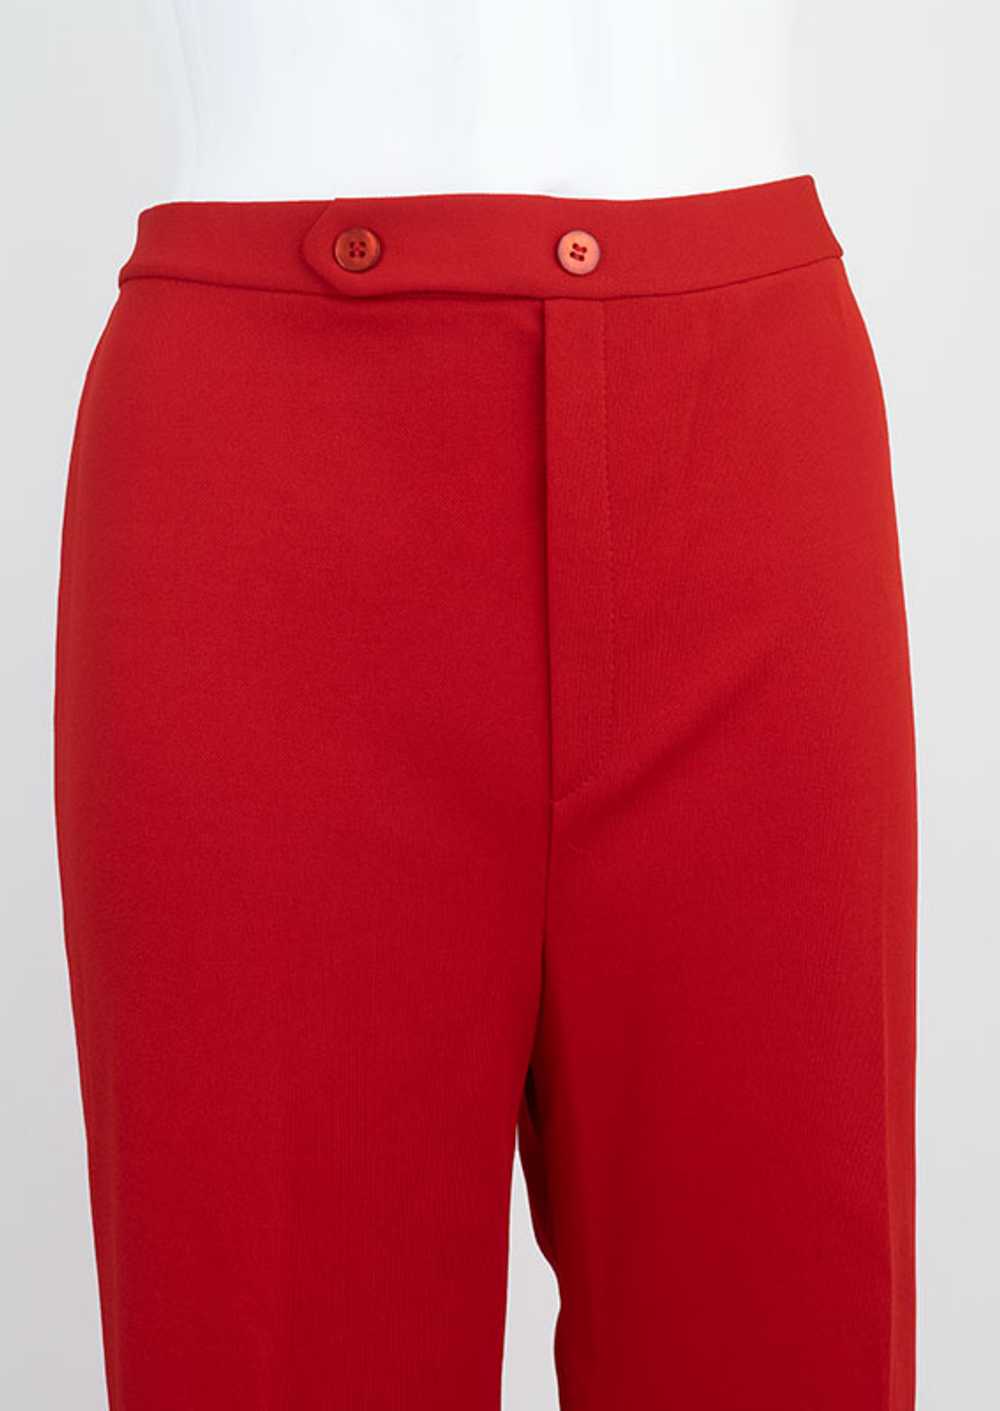 1970s Red Flared Pants - image 2